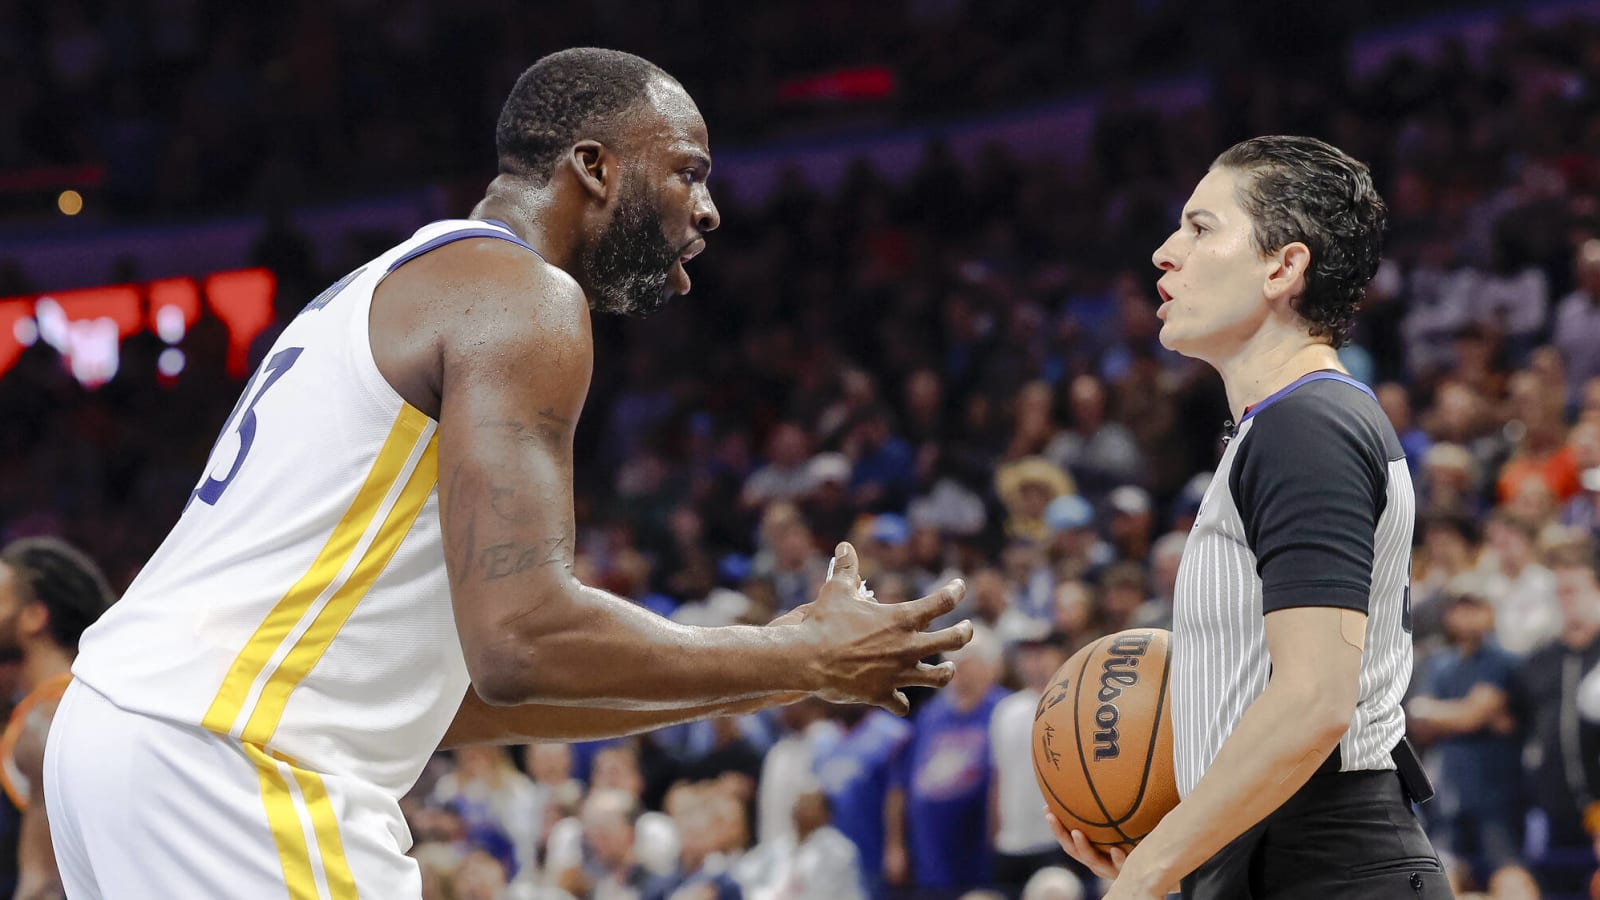 Watch: Draymond Green gets away with yelling at officials for 40 seconds